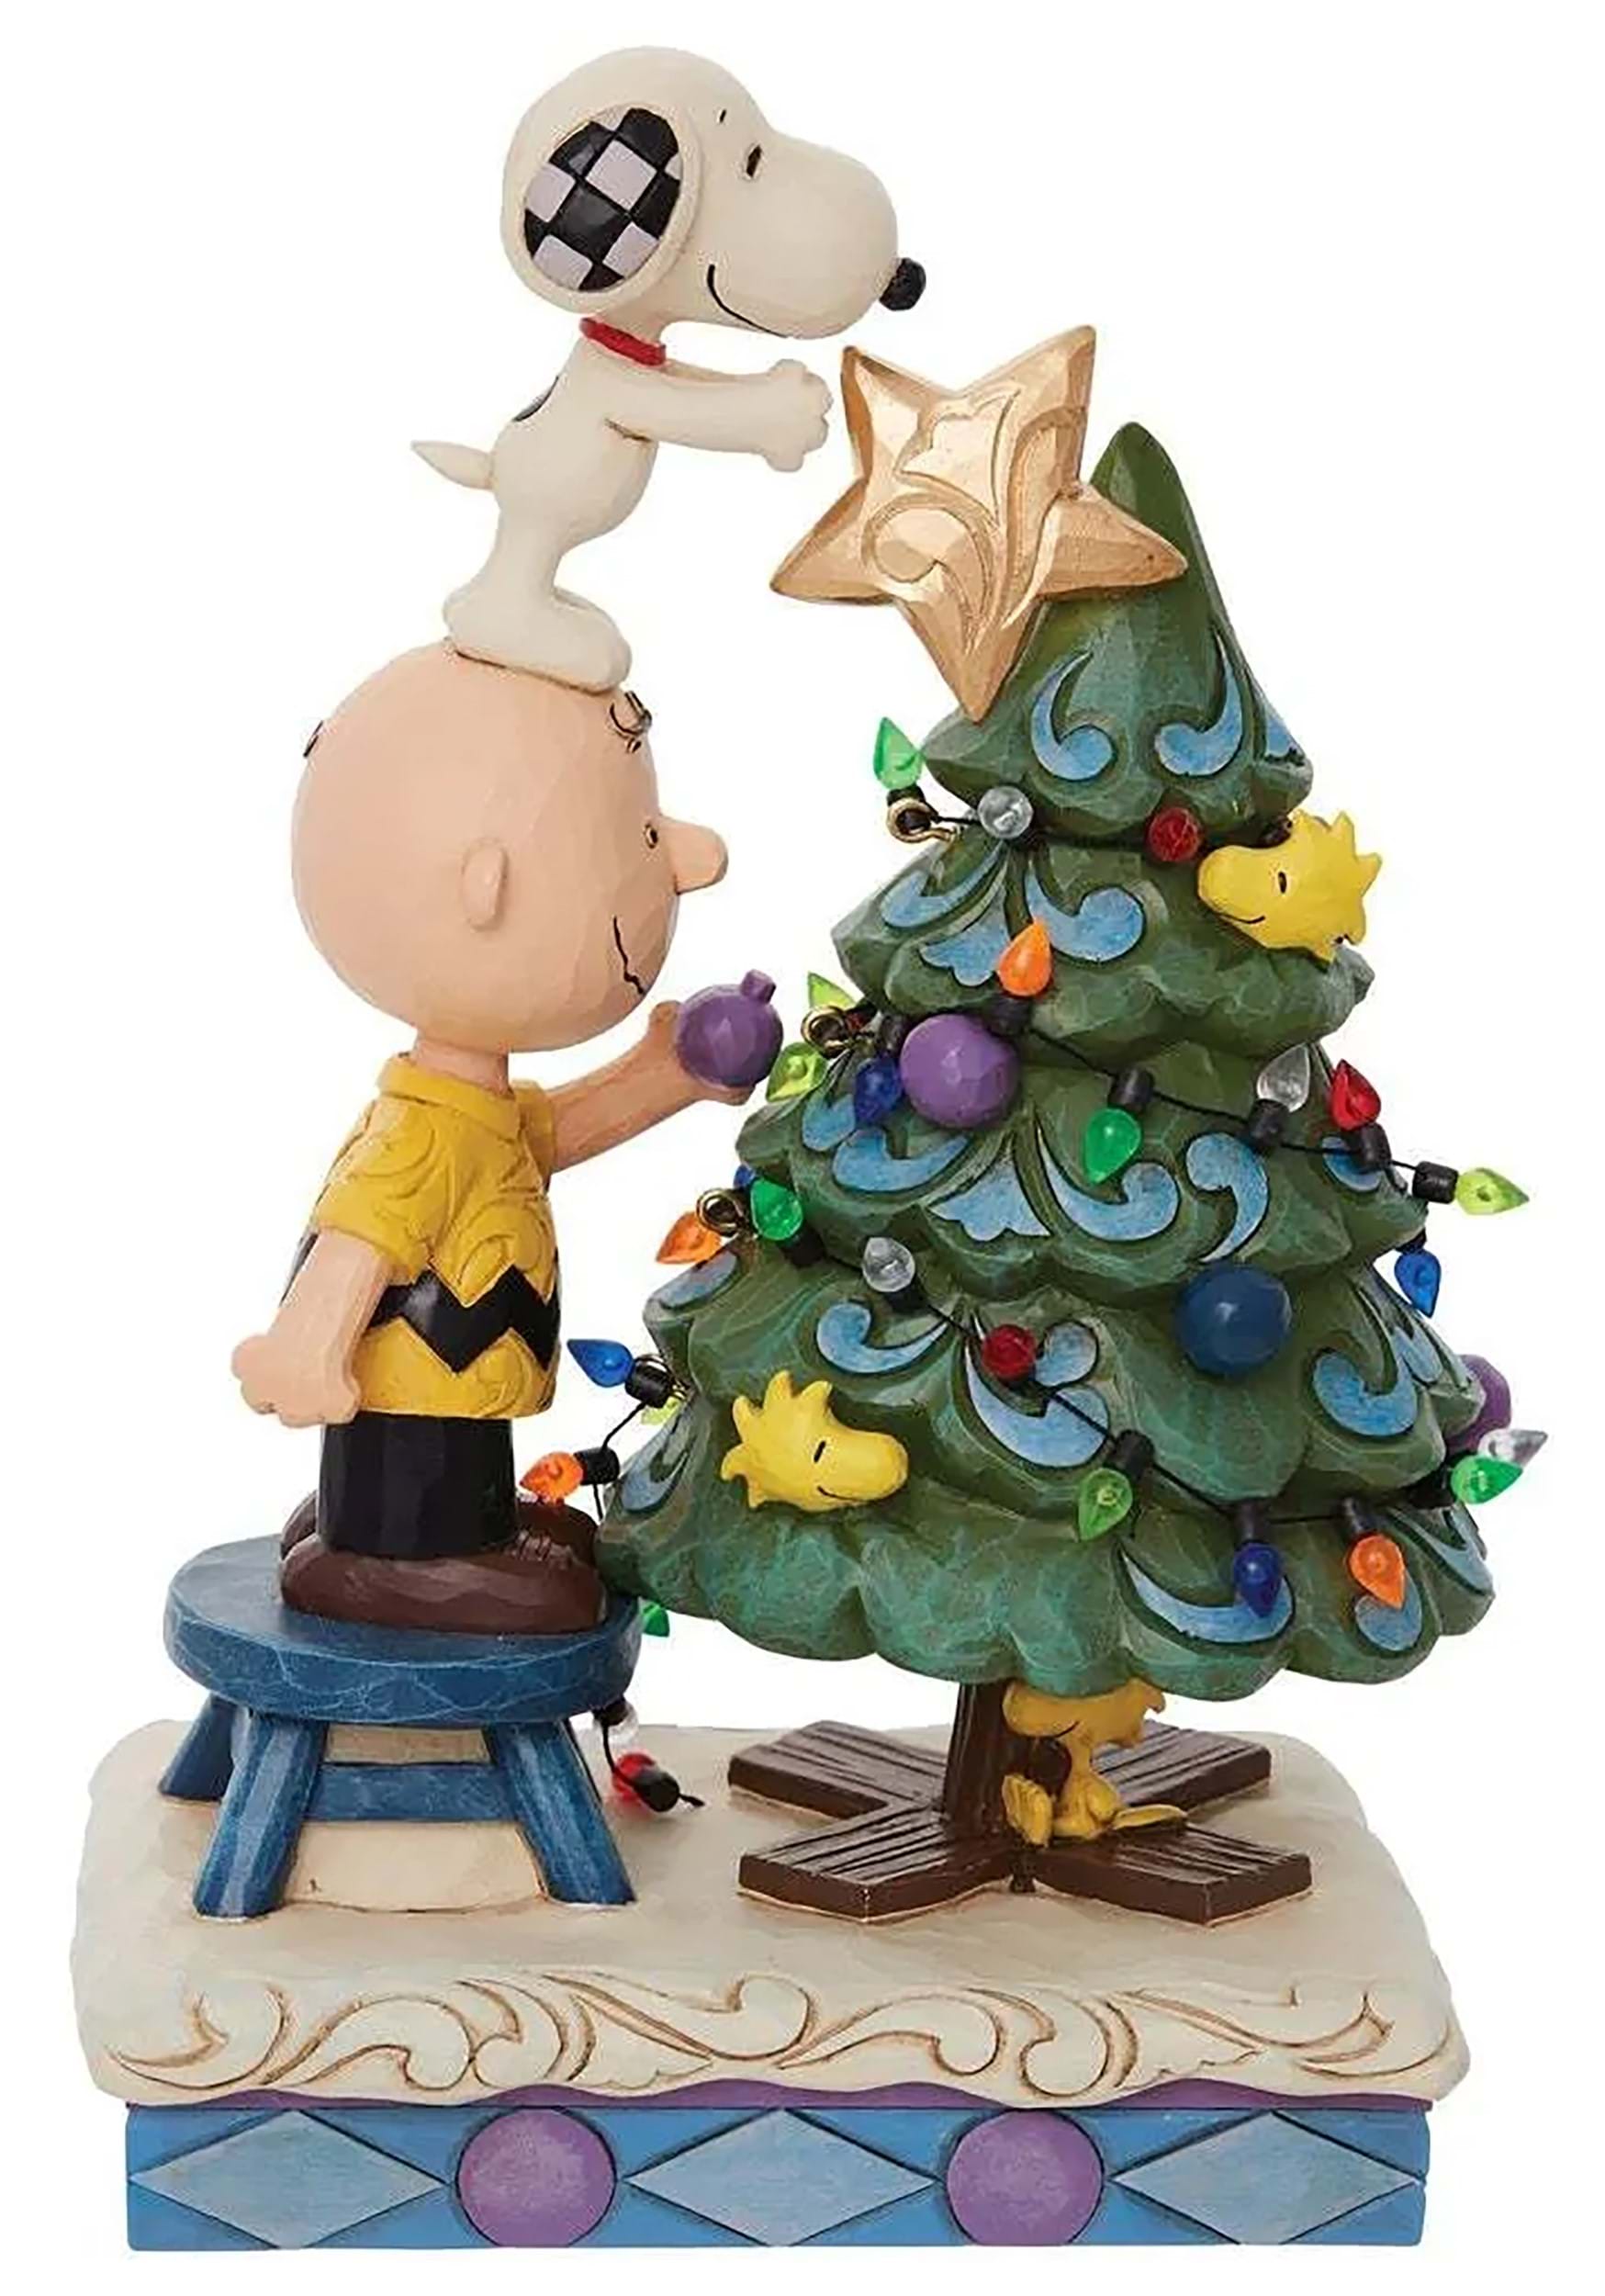 Charlie Brown & Snoopy Jim Shore Decorate Statue